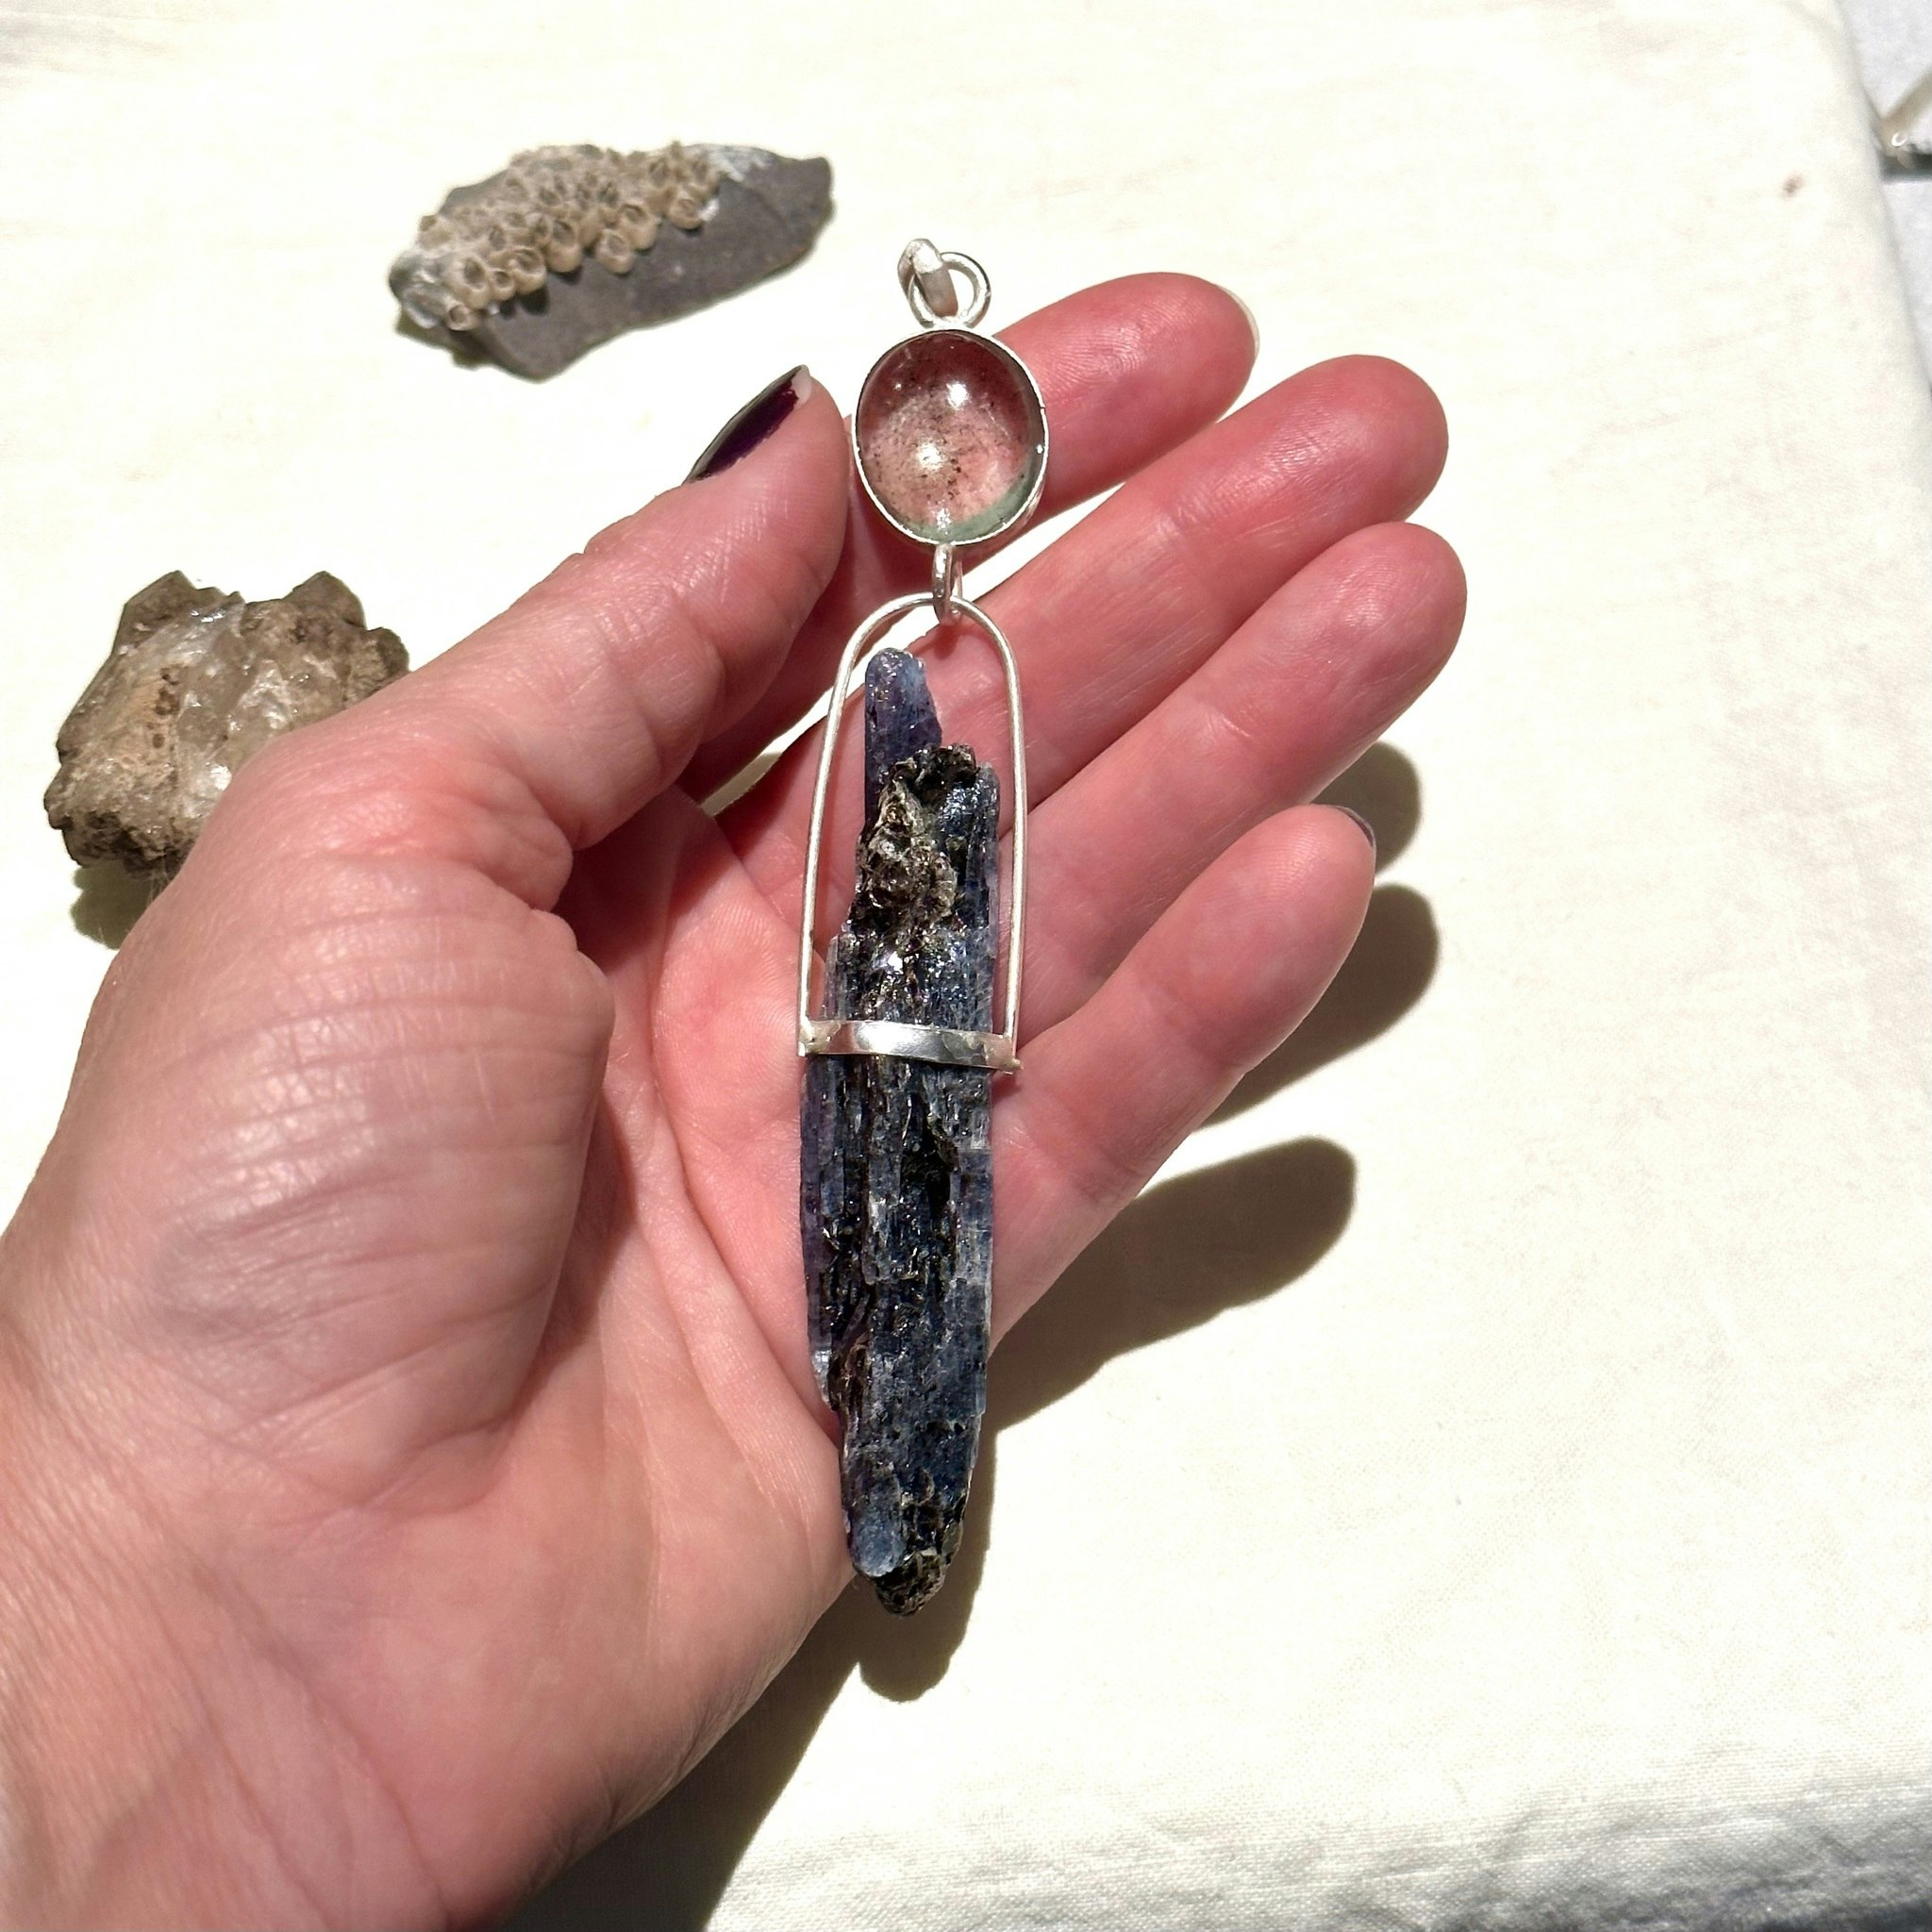 Aquamarine with exciting inclusions with blue kyanite